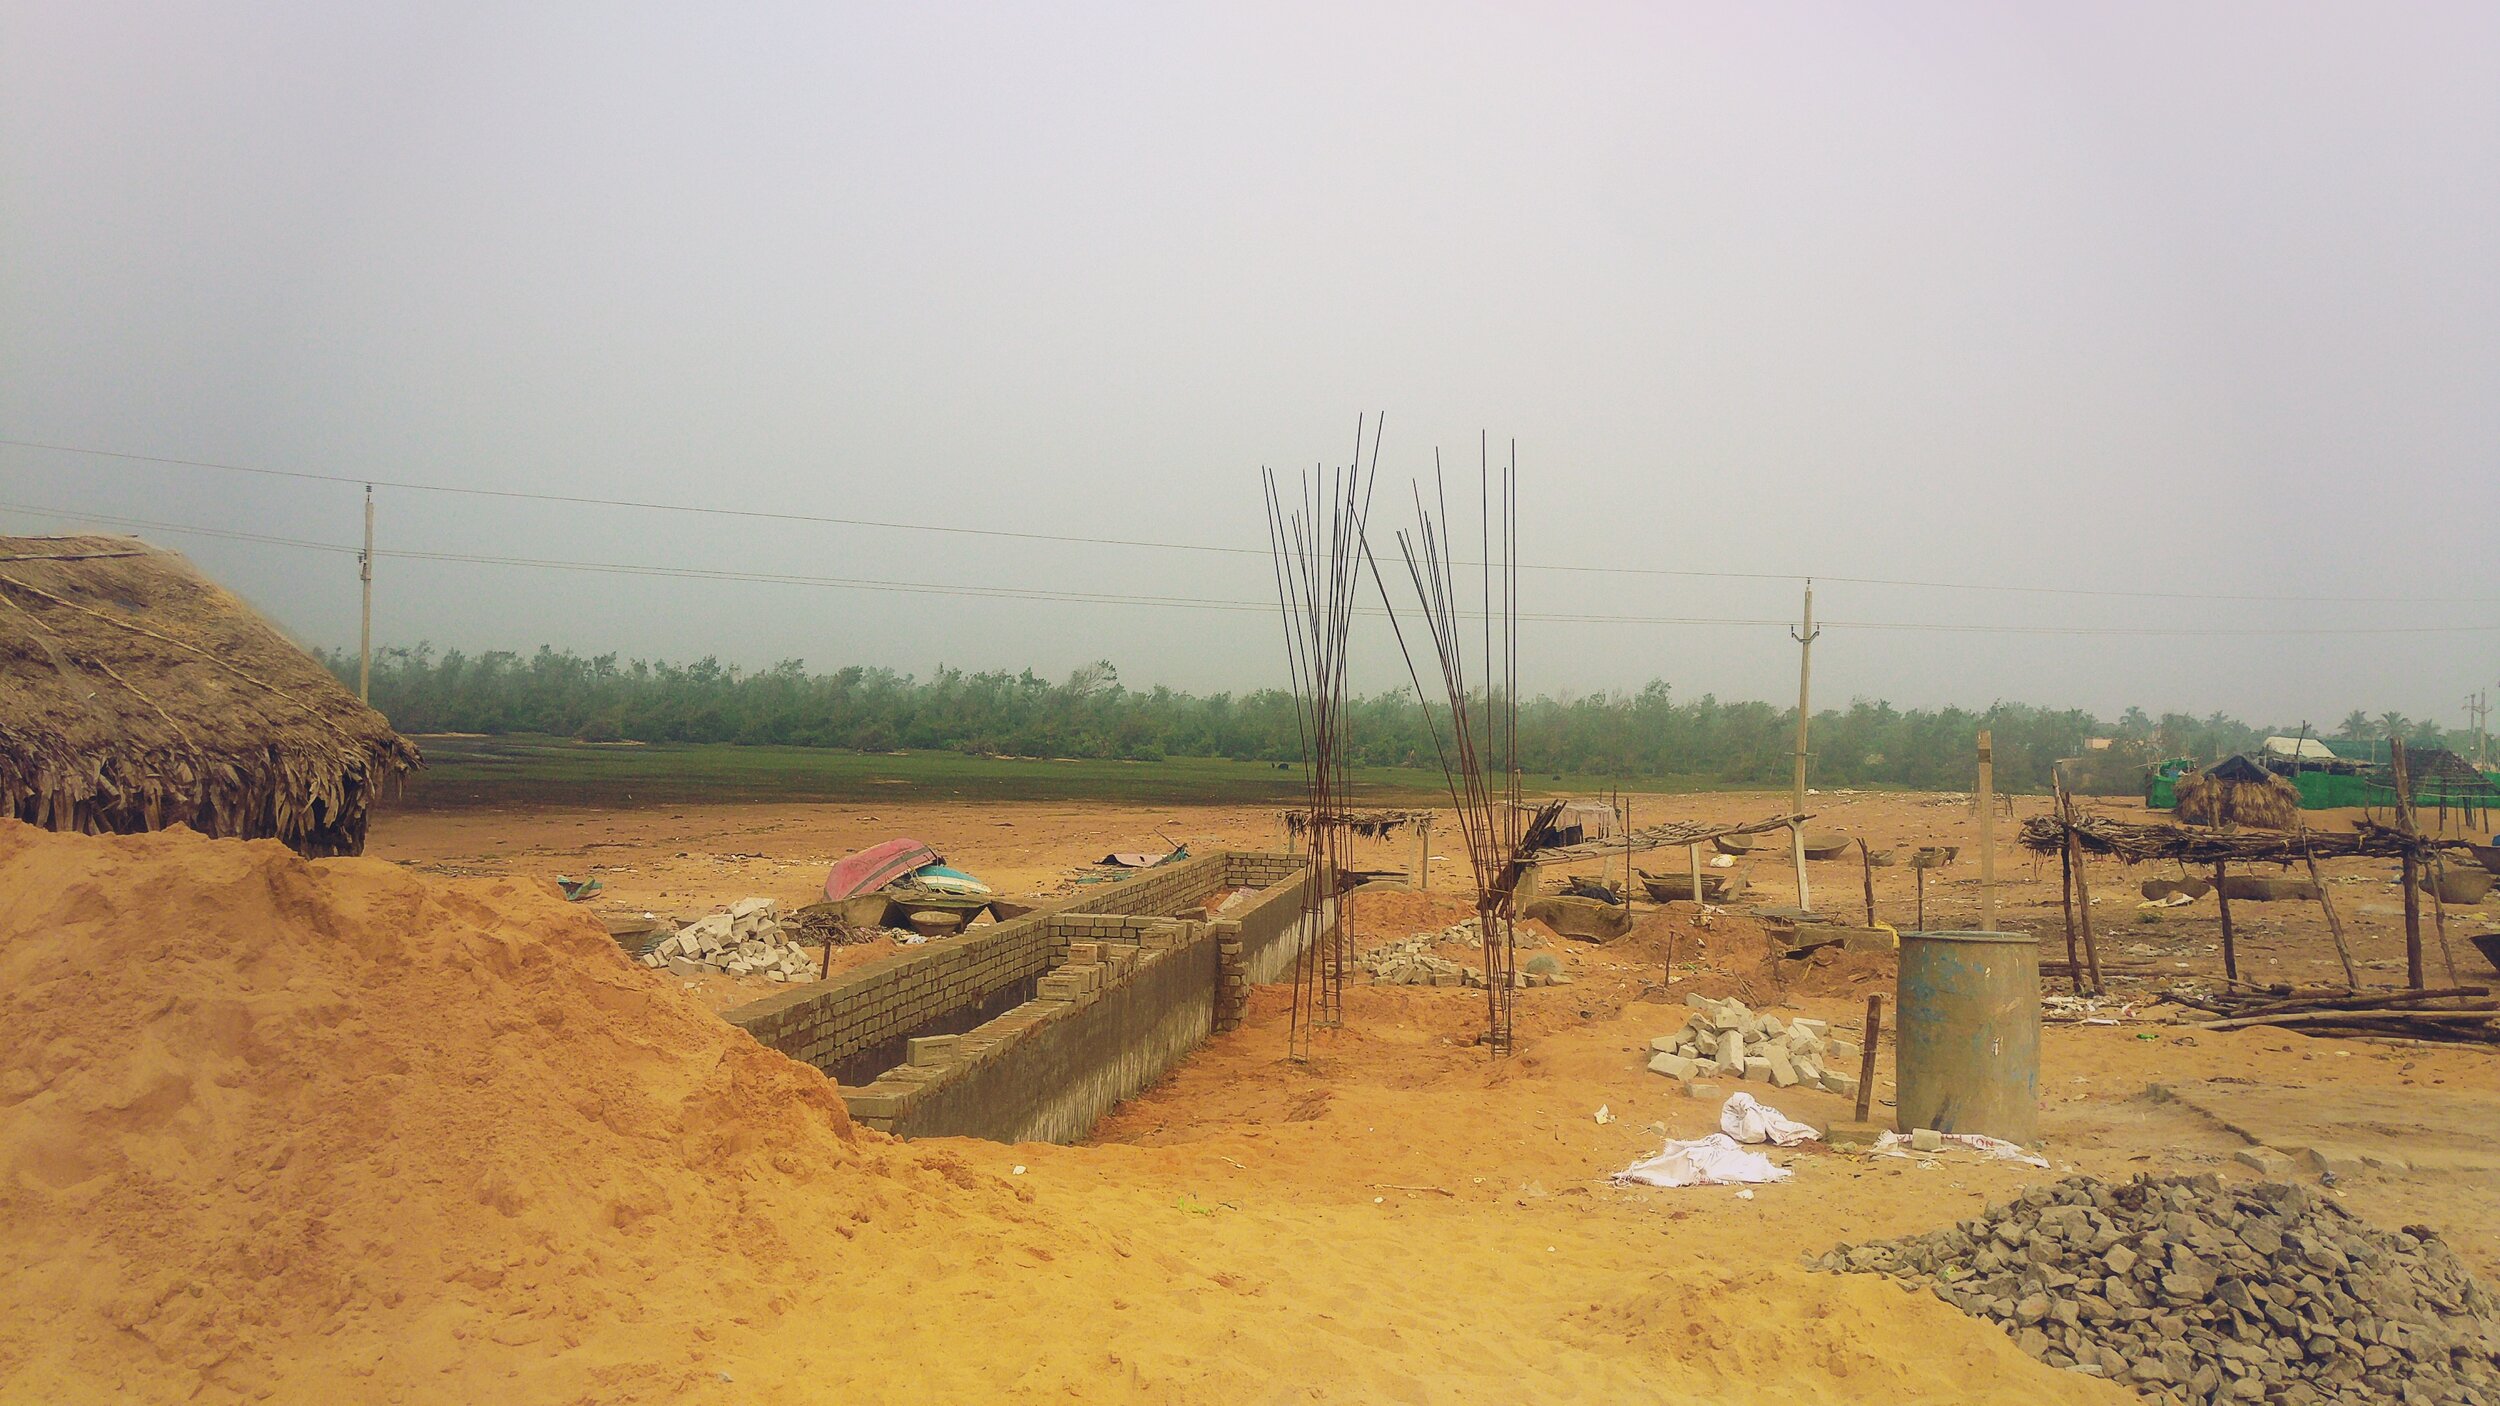 Community infrastructure getting built as part of the slum upgradation plan